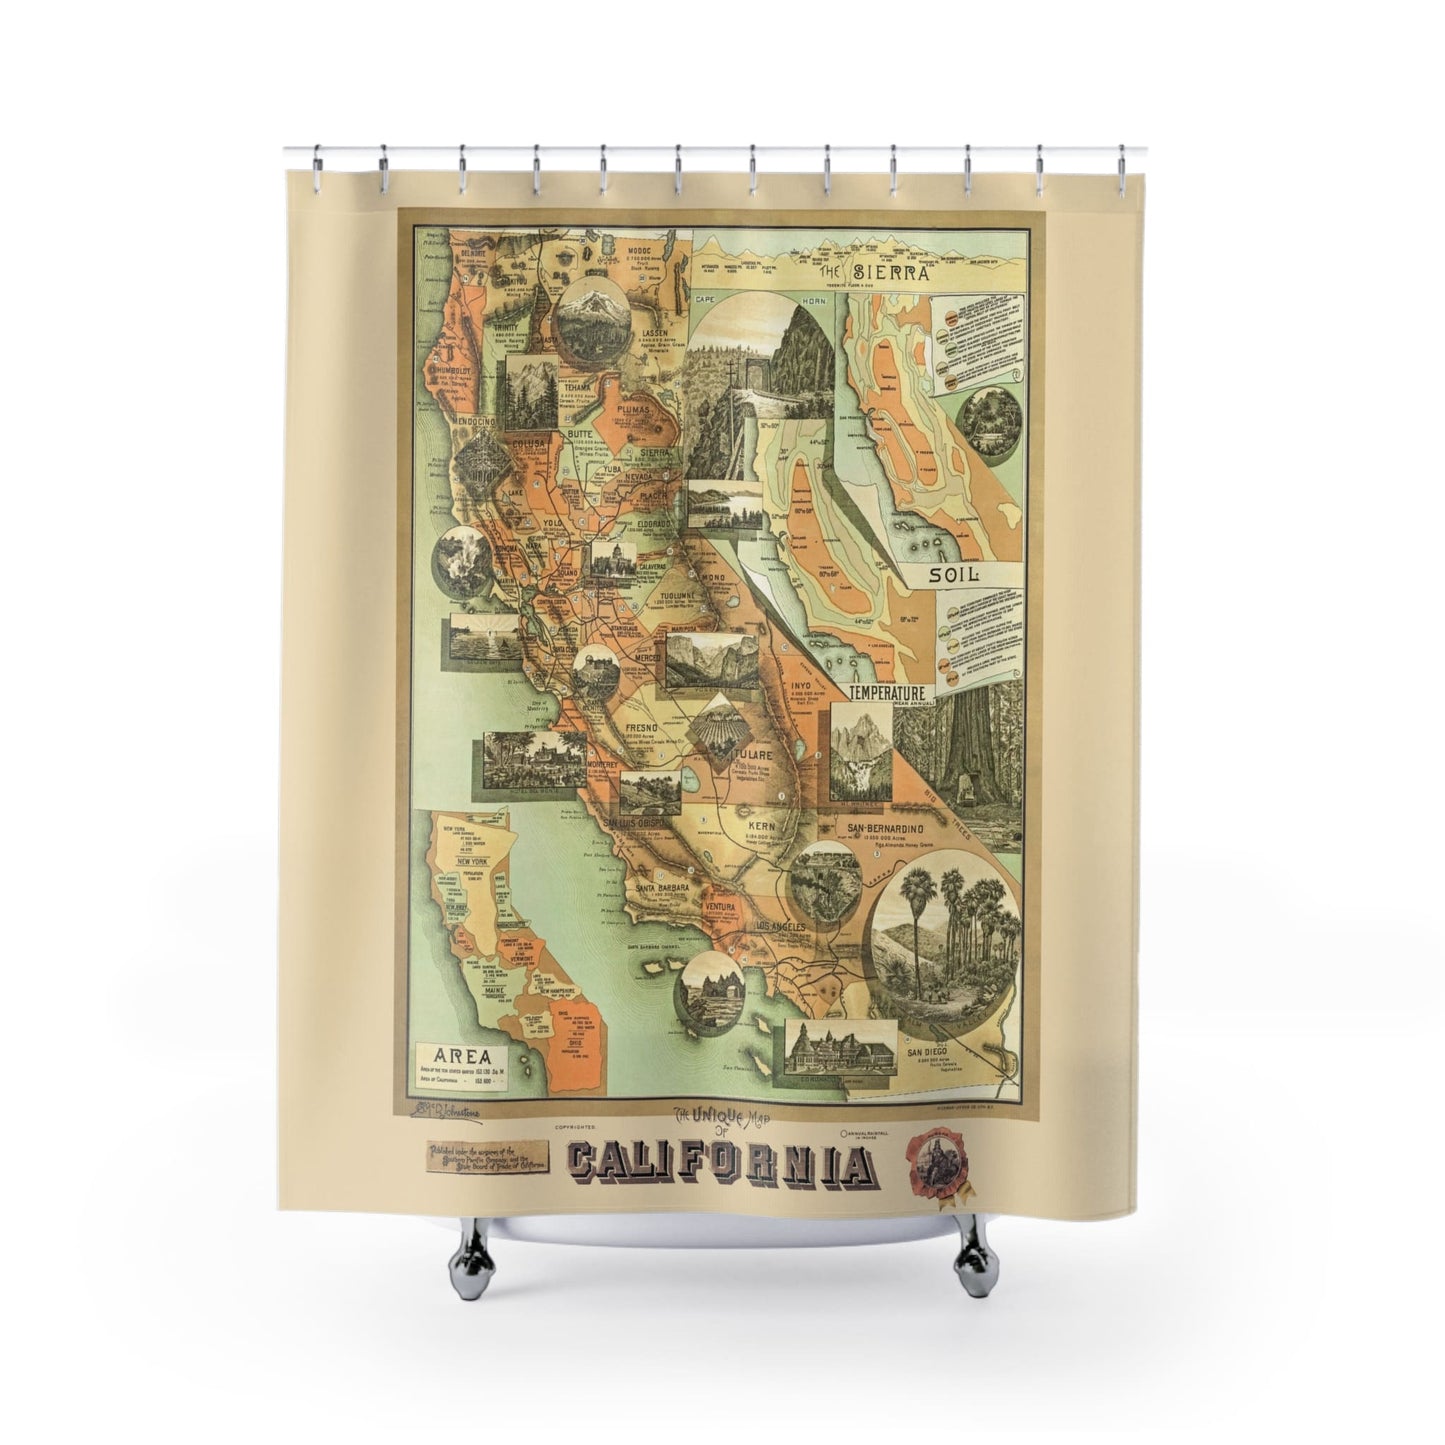 Unique Map of California Shower Curtain with pictorial design, cultural bathroom decor featuring a detailed map of California.